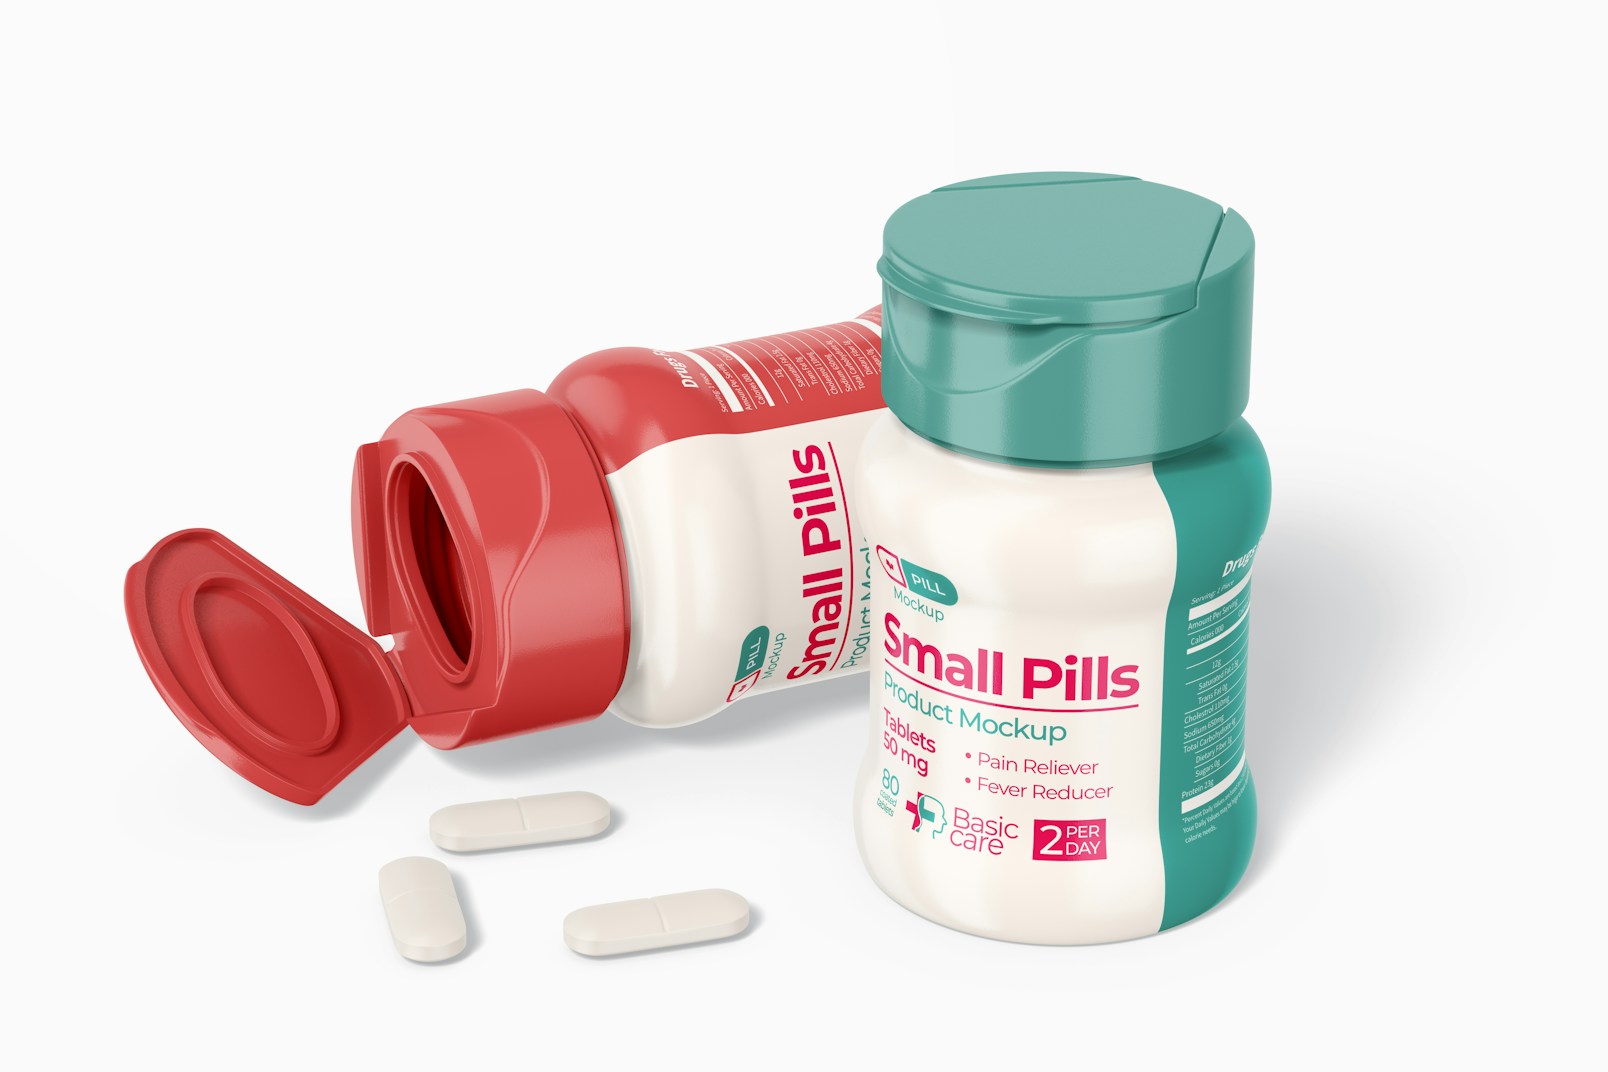 Small Pills Bottle Mockup, Opened and Closed